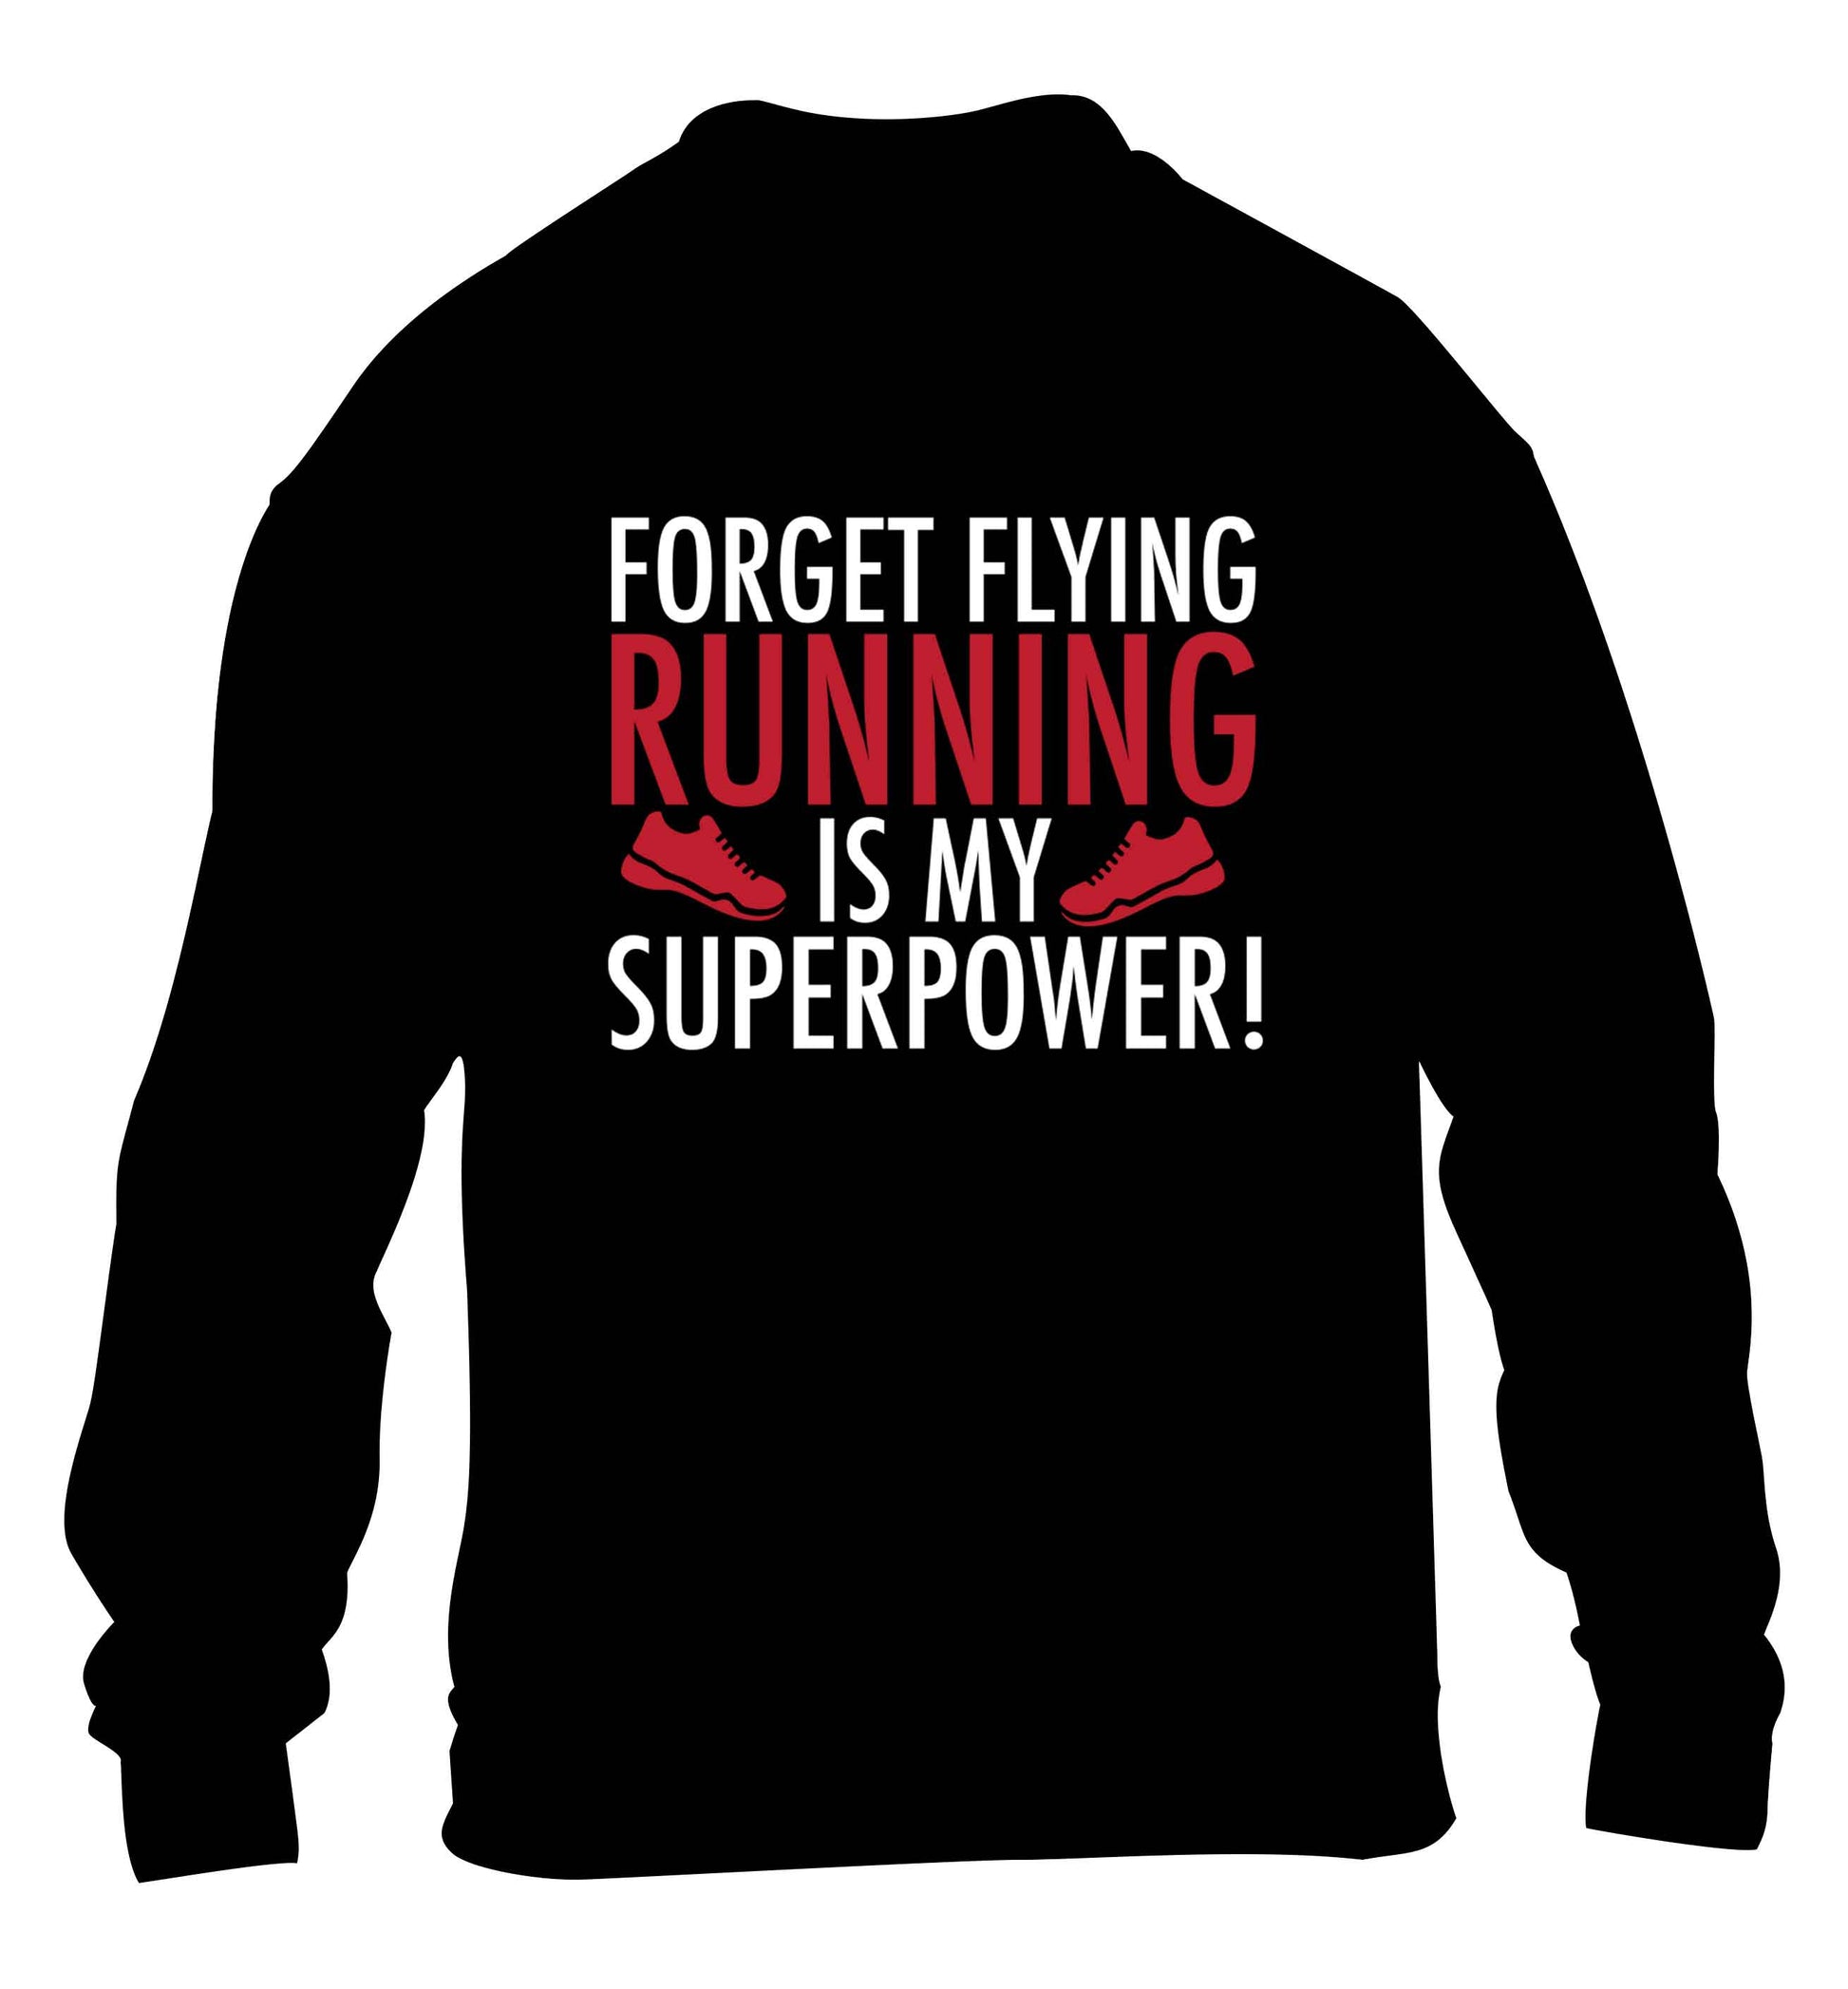 Forget flying running is my superpower children's black sweater 12-13 Years